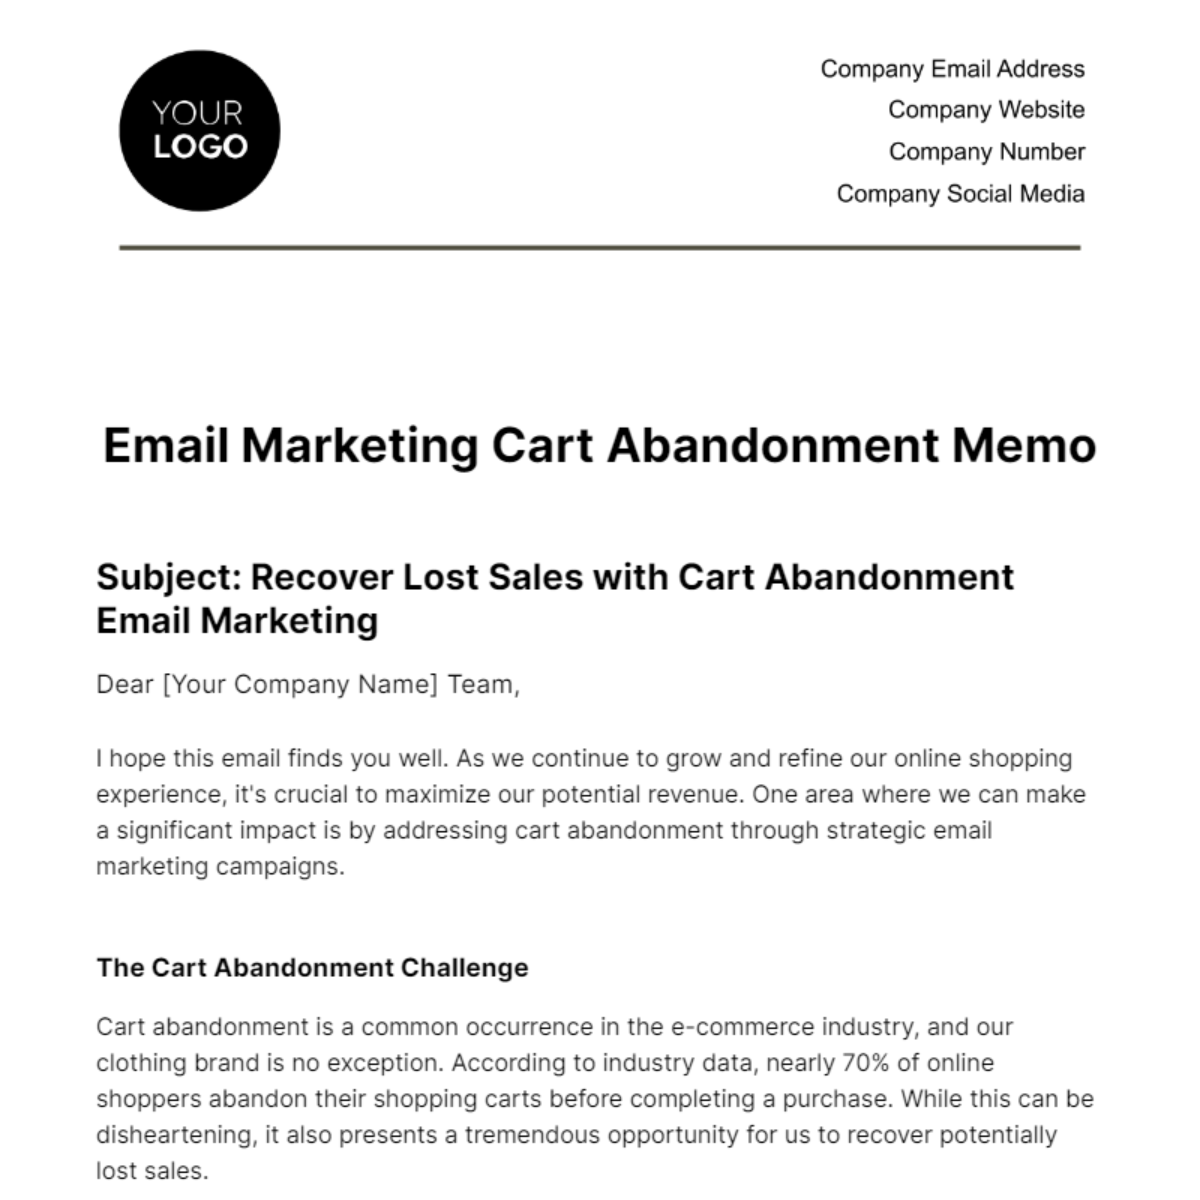 Free Email Marketing Cart Abandonment Memo Template